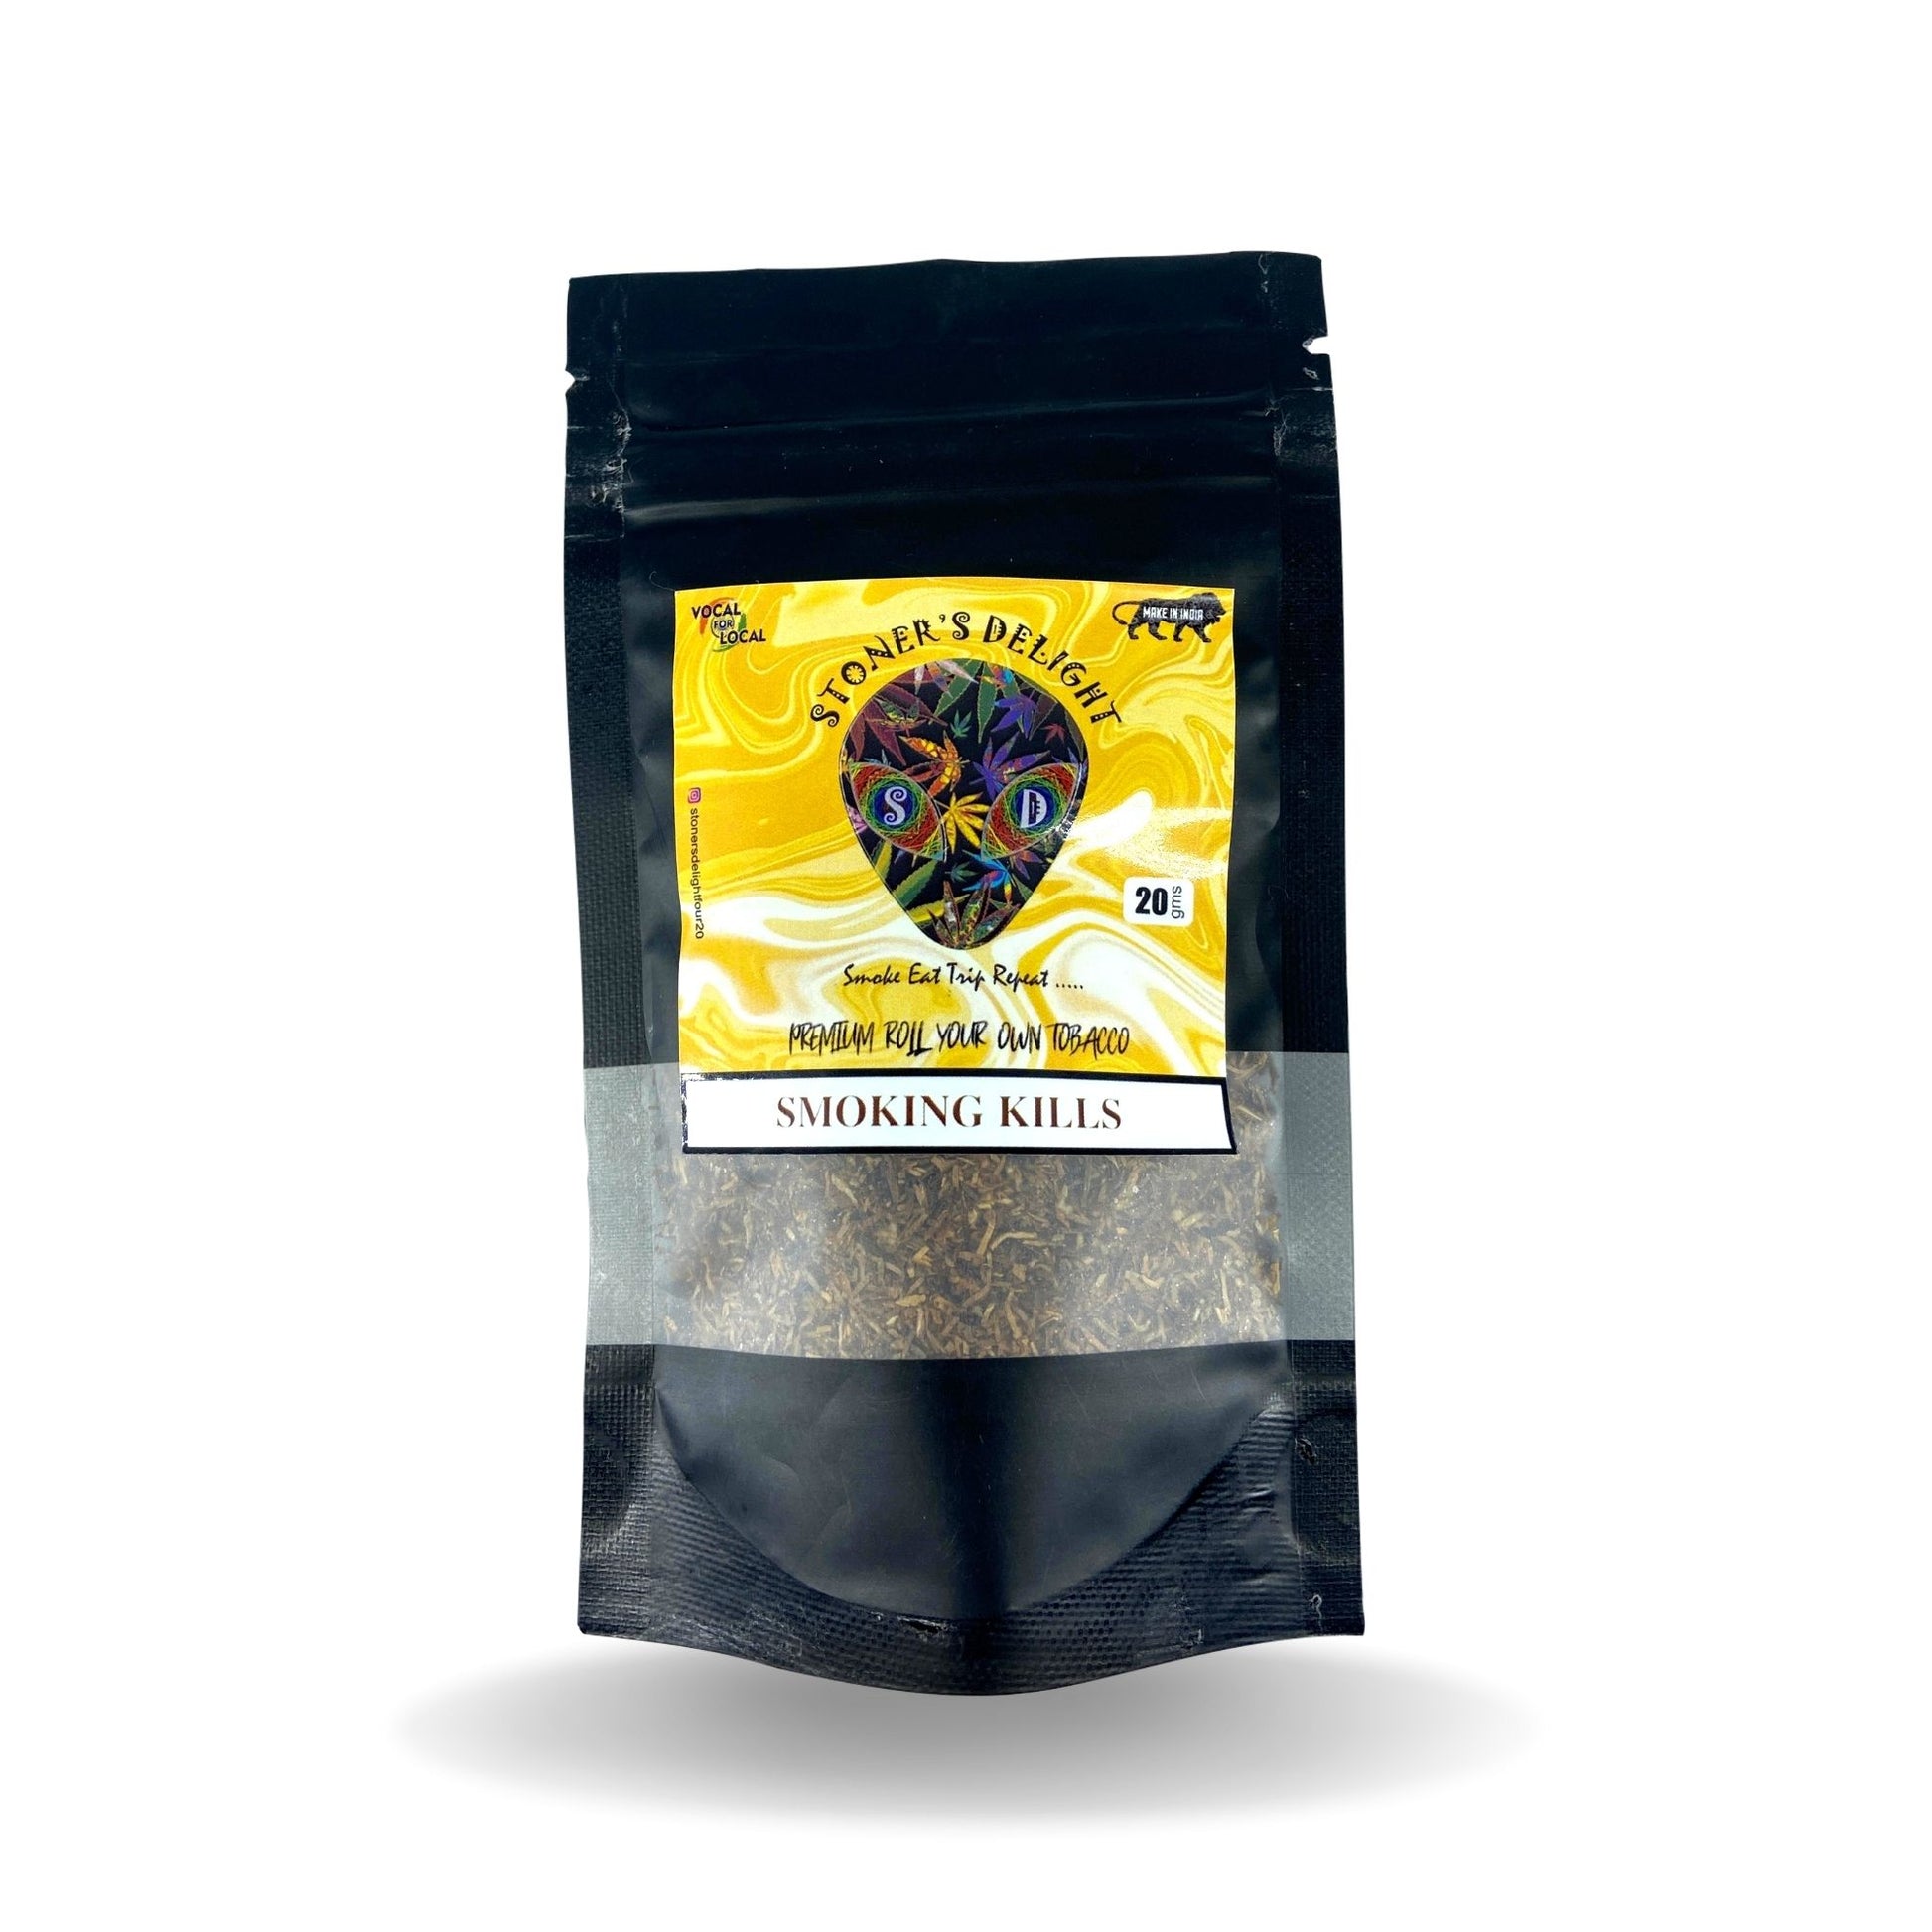 Buy Stoners Delight Burley Rolling Tobacco Online in India at Highjack